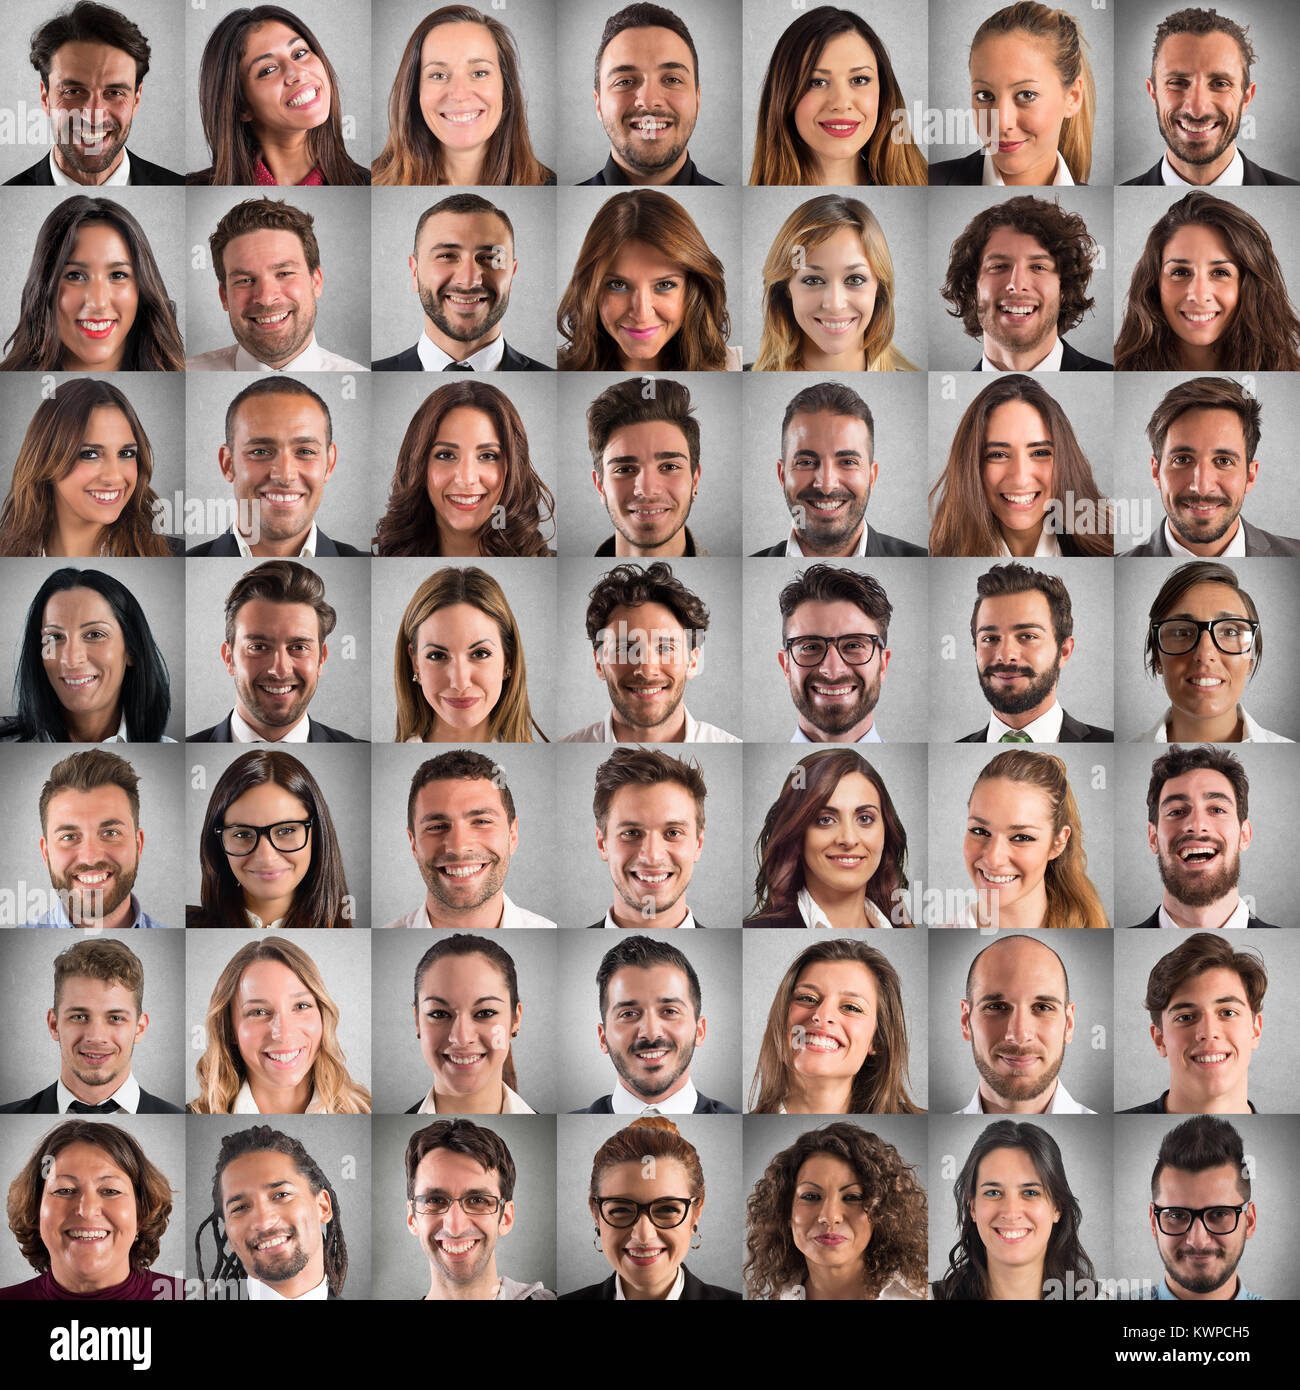 Happy and positive faces collage of business people Stock Photo